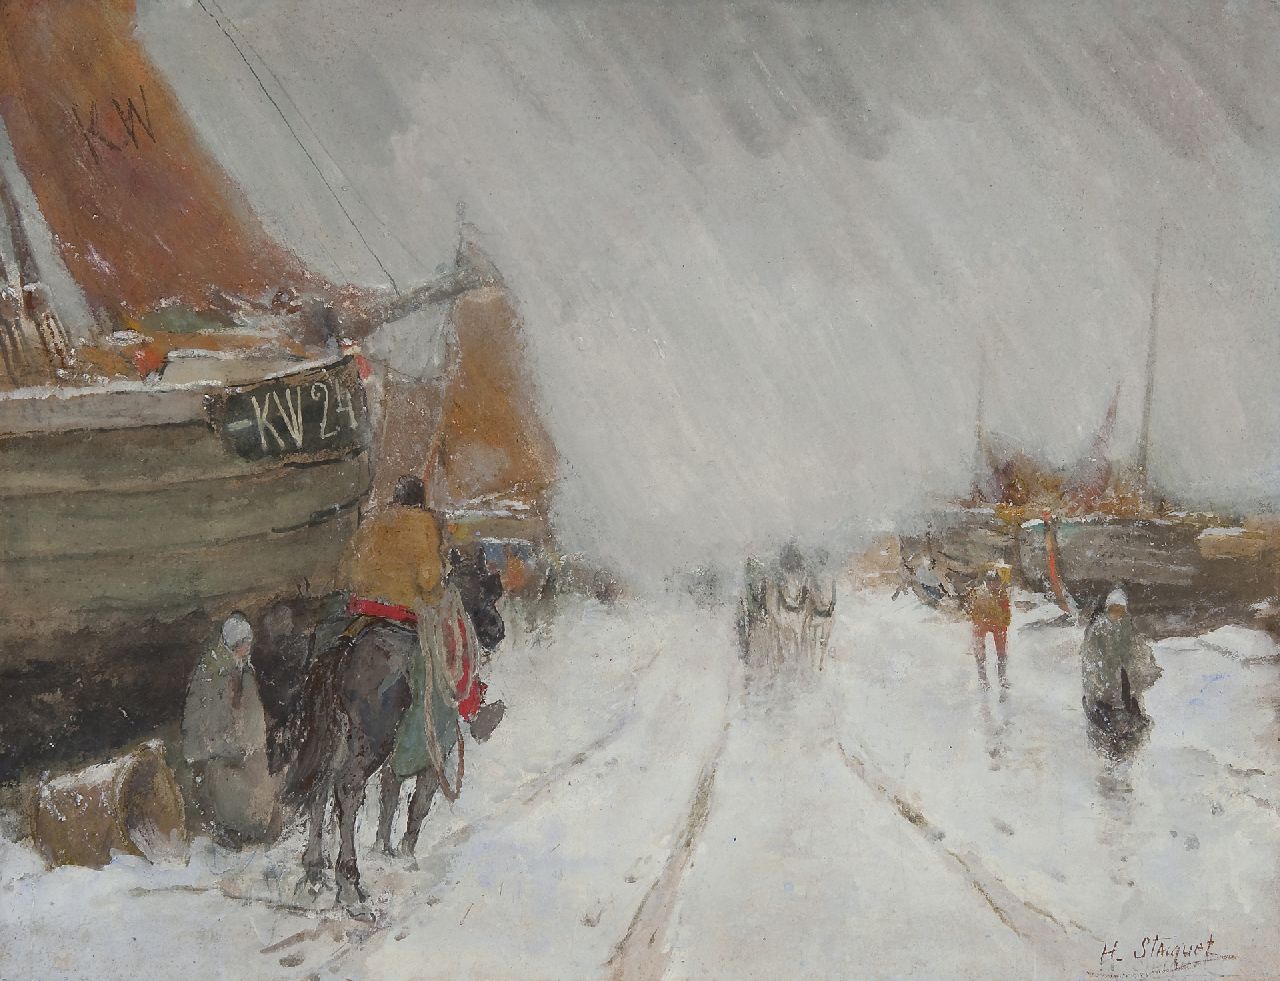 Stacquet H.  | Henri Stacquet, The KW 24 in the snow, gouache on paper 50.0 x 60.0 cm, signed l.r.